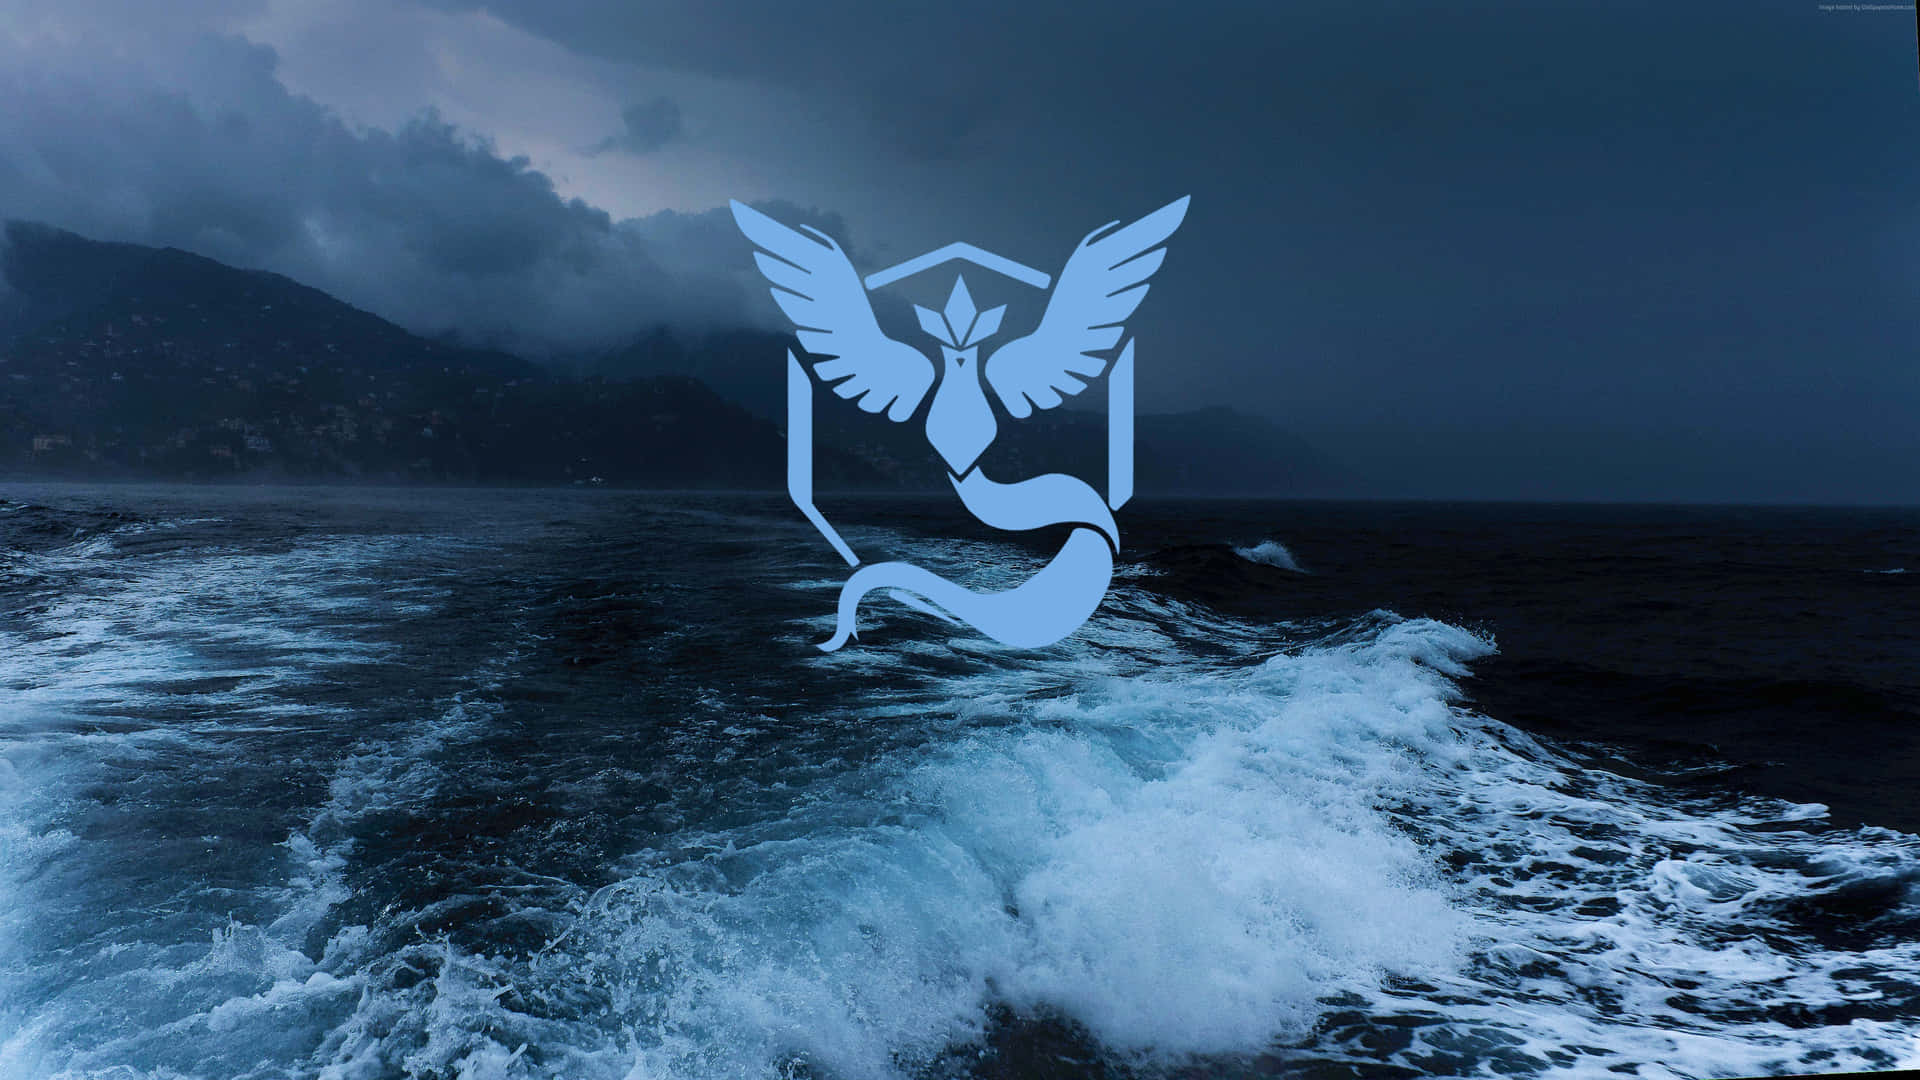 Pokemon Logo On A Blue Ocean With Waves